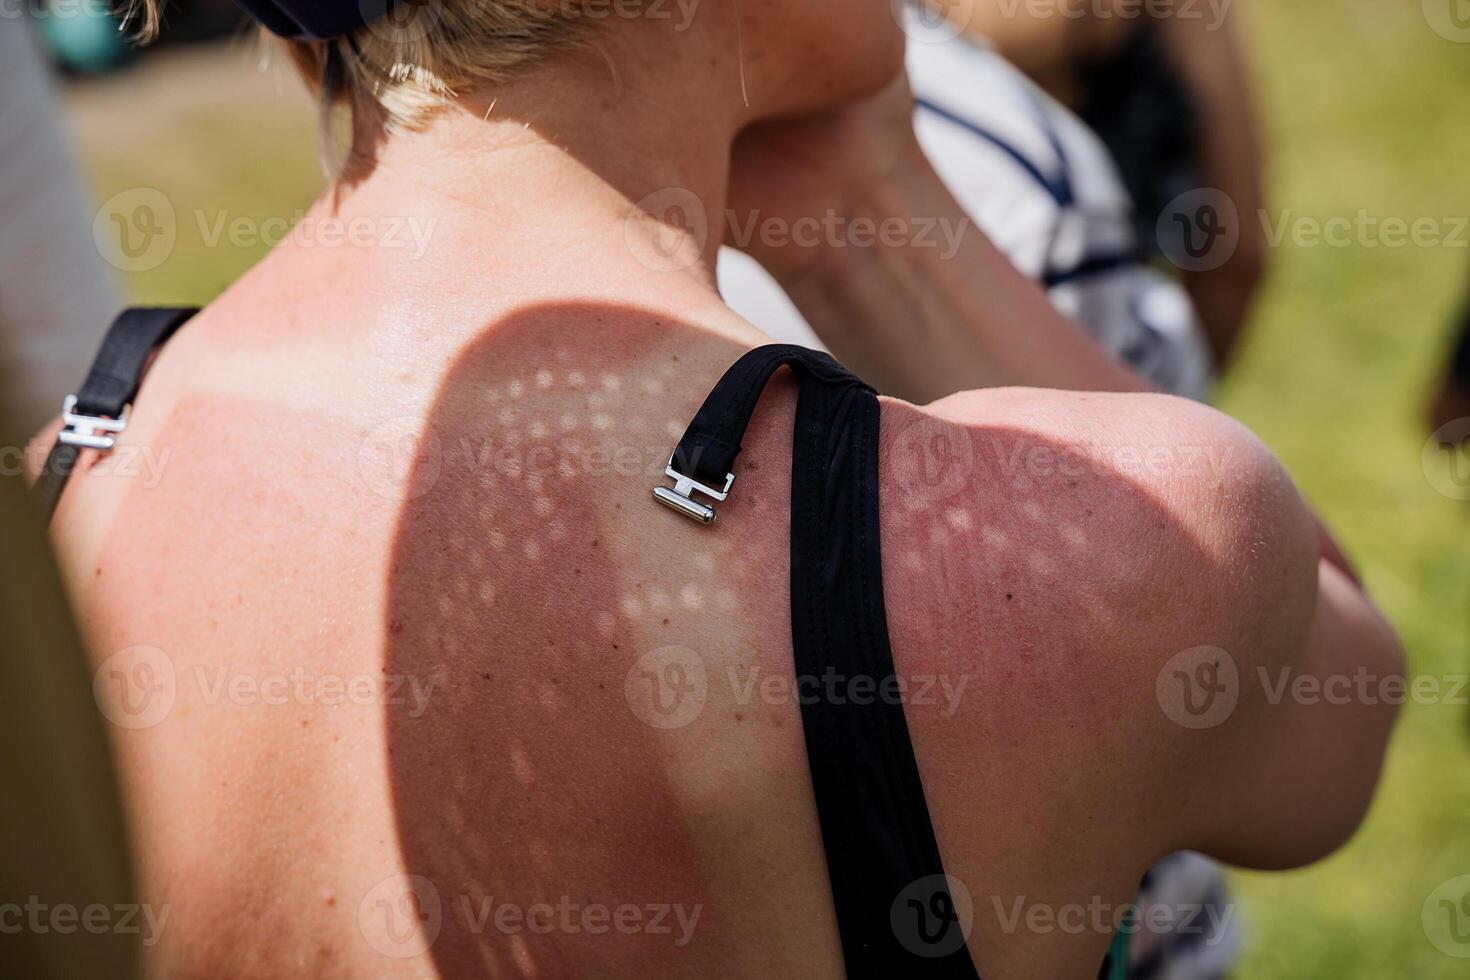 The girl's back was burned in the sun, tan marks from the bright sun, the bra clasp, the view from the back of a person on vacation, summer holidays at sea. photo